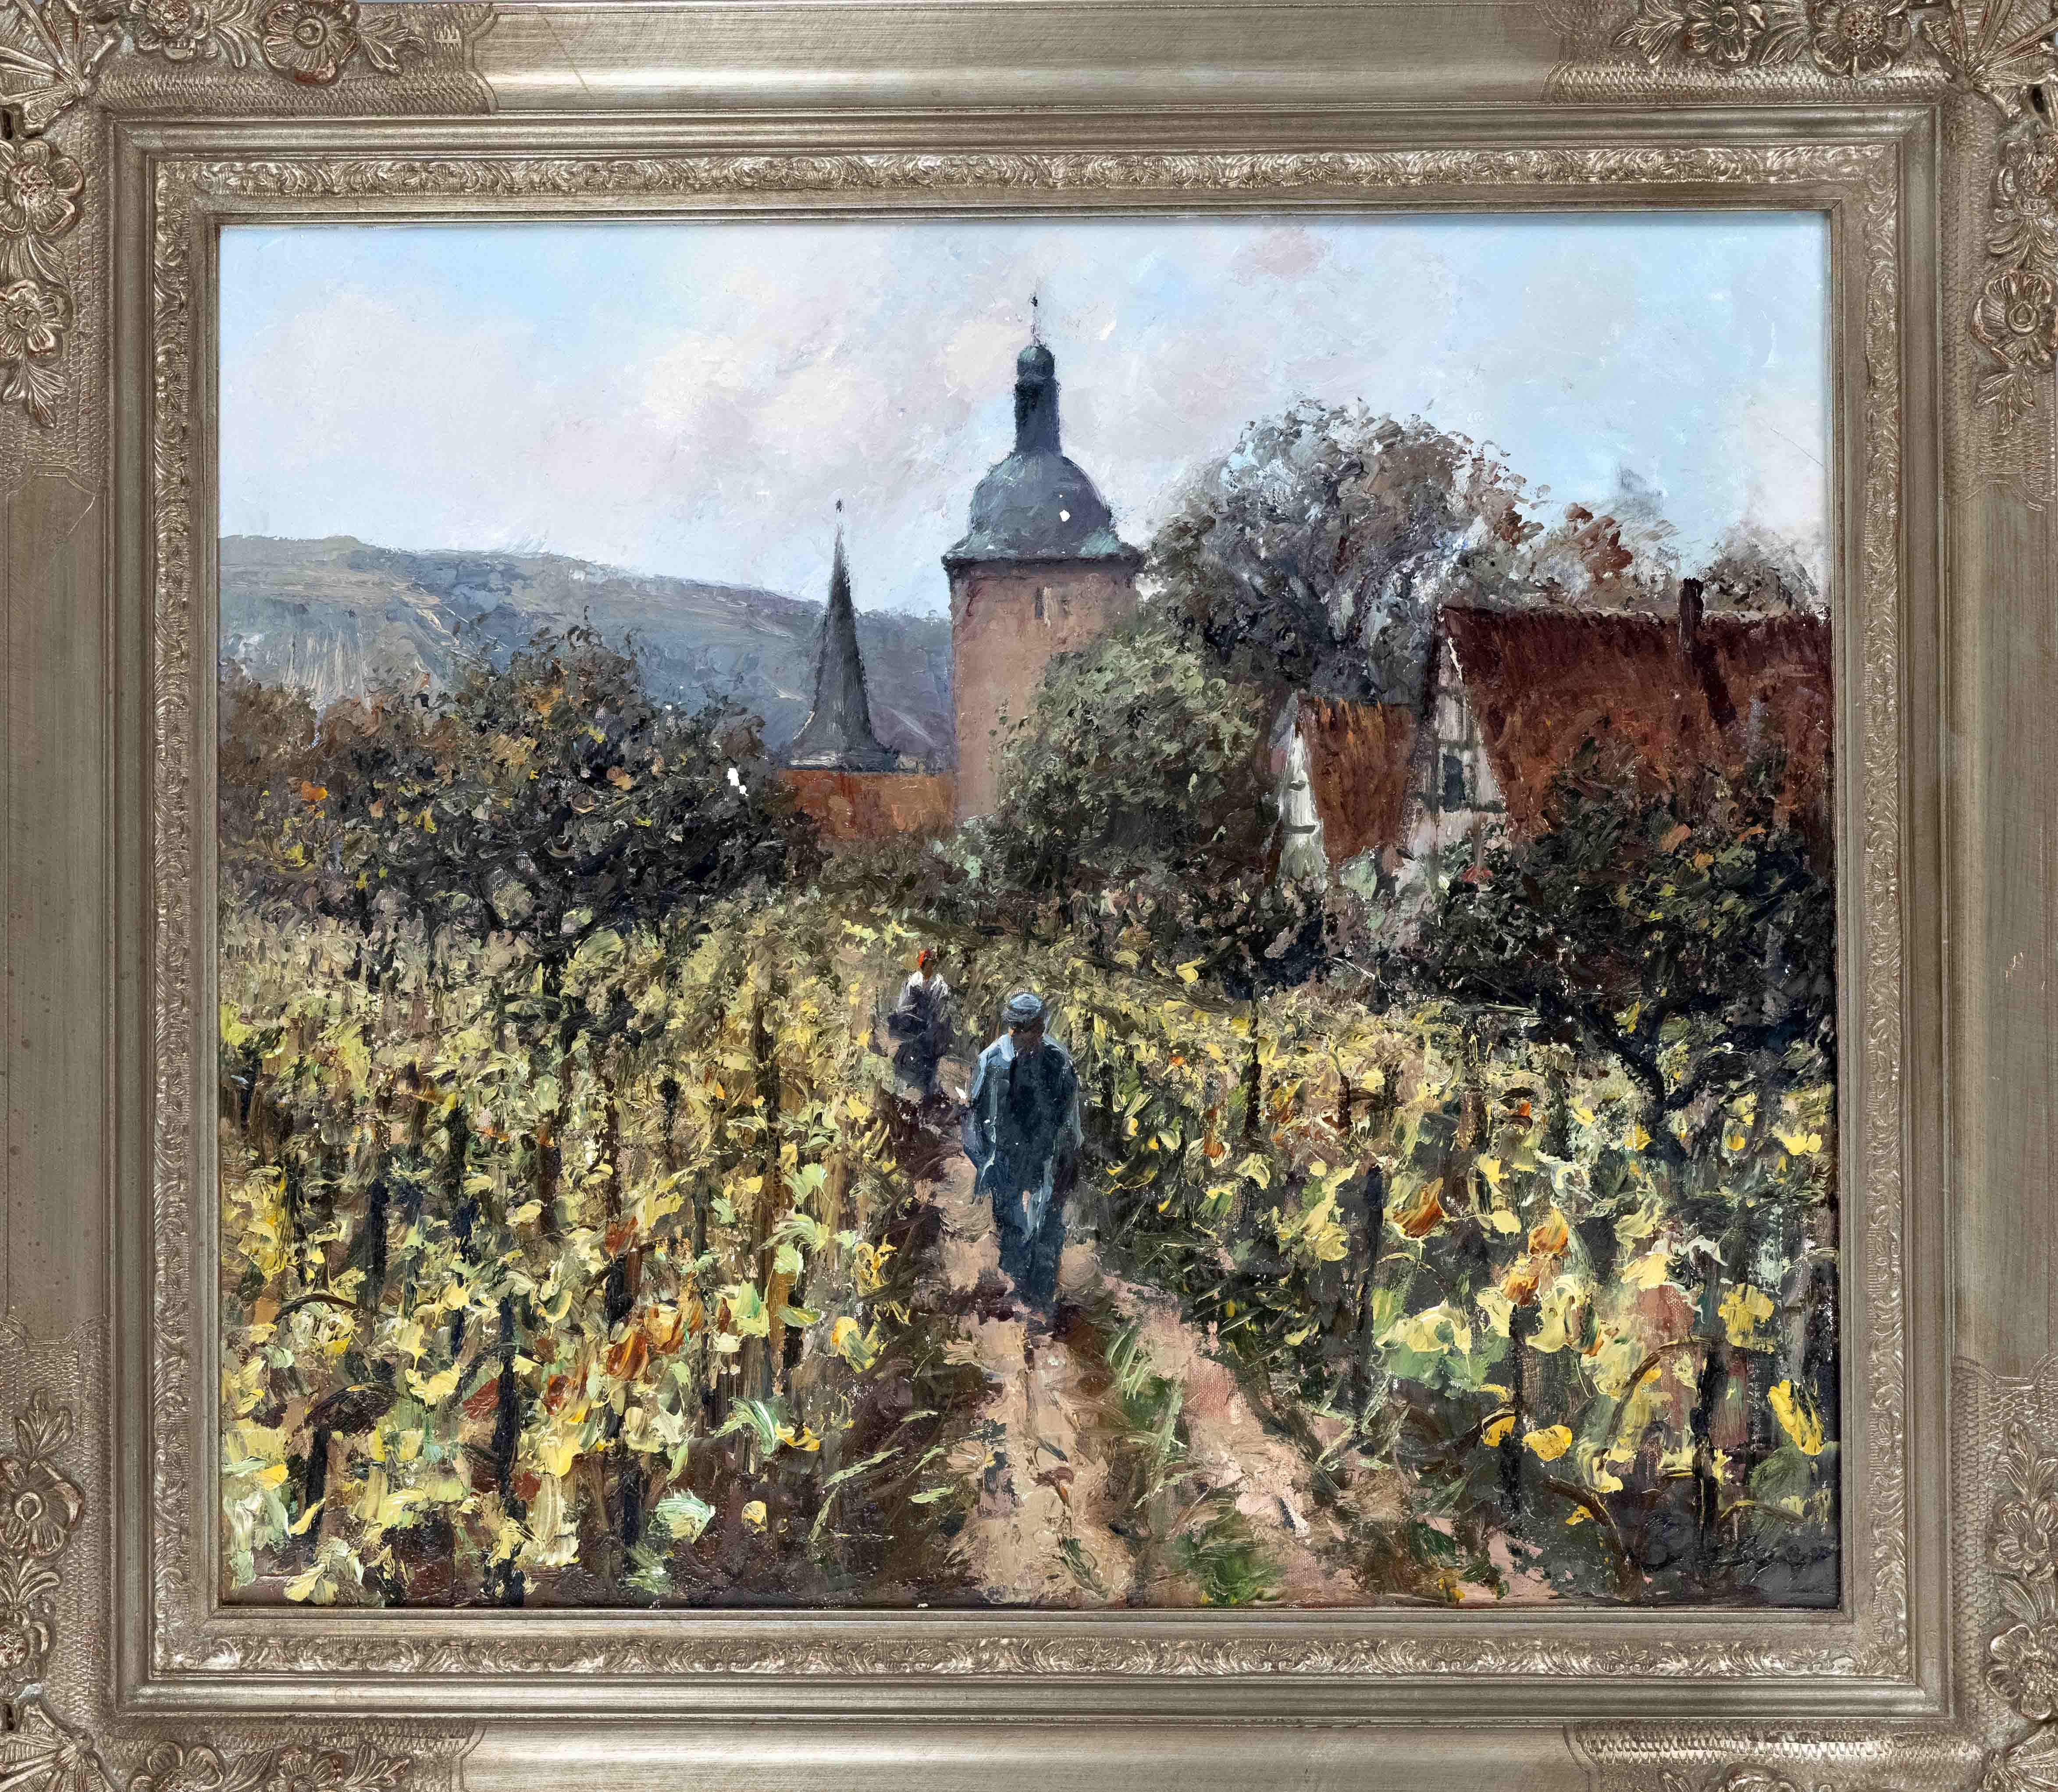 signed ''Becker'', German painter mid-20th century, village view with winemaker couple roaming